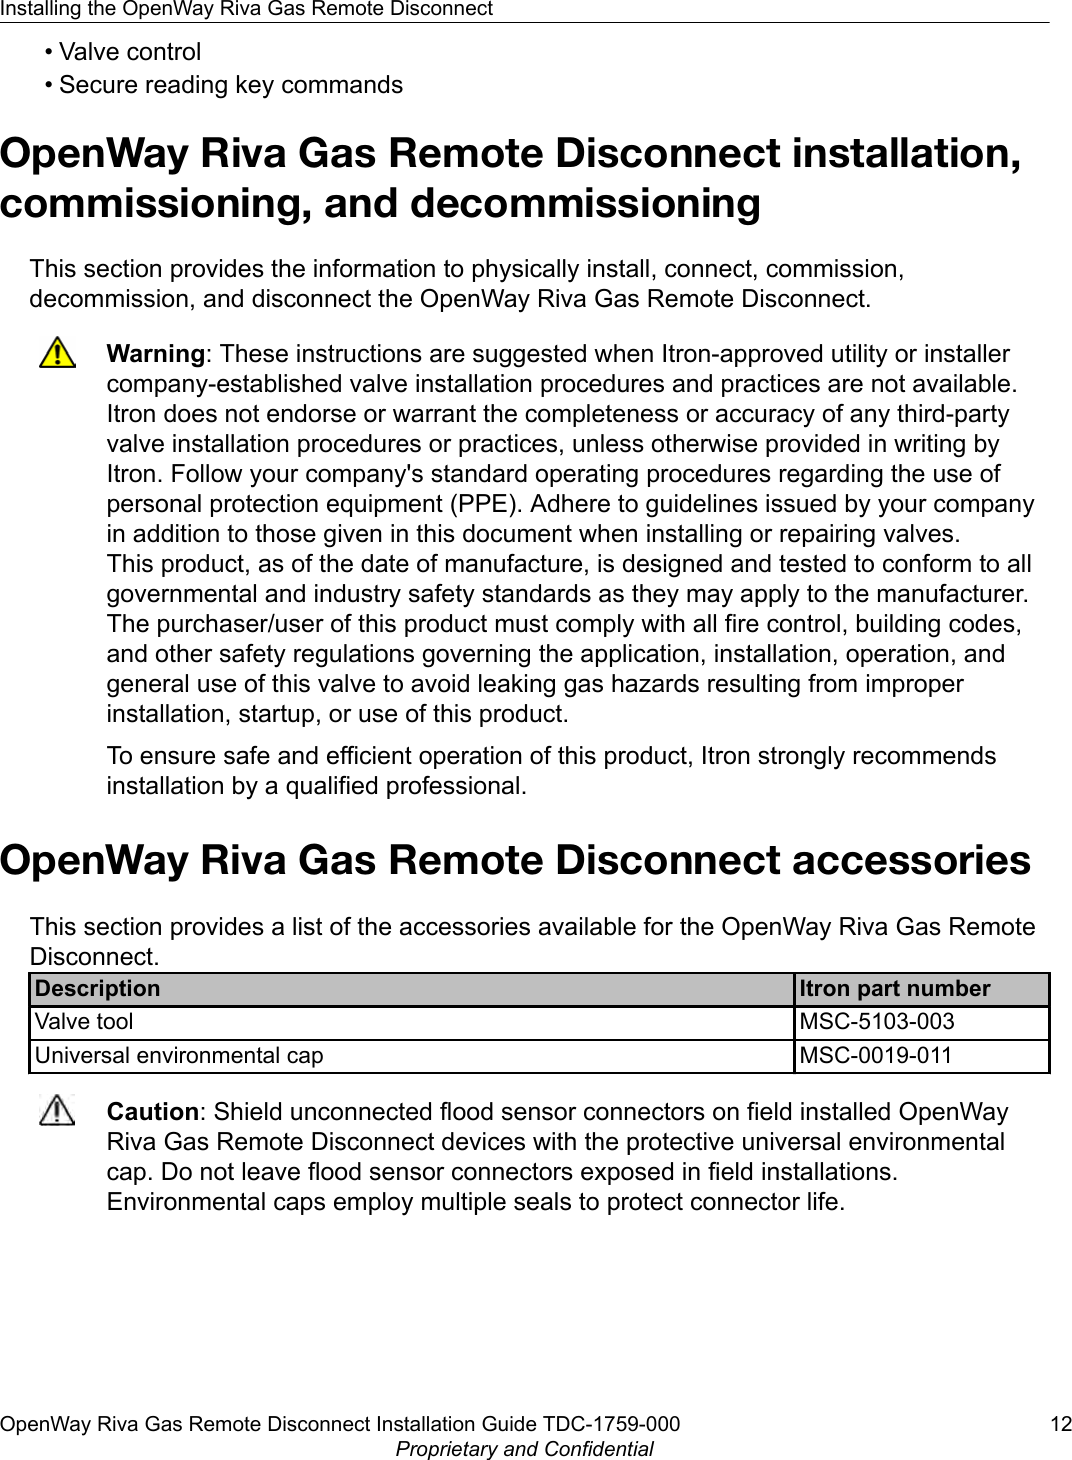 • Valve control• Secure reading key commandsOpenWay Riva Gas Remote Disconnect installation,commissioning, and decommissioningThis section provides the information to physically install, connect, commission,decommission, and disconnect the OpenWay Riva Gas Remote Disconnect.Warning: These instructions are suggested when Itron-approved utility or installercompany-established valve installation procedures and practices are not available.Itron does not endorse or warrant the completeness or accuracy of any third-partyvalve installation procedures or practices, unless otherwise provided in writing byItron. Follow your company&apos;s standard operating procedures regarding the use ofpersonal protection equipment (PPE). Adhere to guidelines issued by your companyin addition to those given in this document when installing or repairing valves.This product, as of the date of manufacture, is designed and tested to conform to allgovernmental and industry safety standards as they may apply to the manufacturer.The purchaser/user of this product must comply with all fire control, building codes,and other safety regulations governing the application, installation, operation, andgeneral use of this valve to avoid leaking gas hazards resulting from improperinstallation, startup, or use of this product.To ensure safe and efficient operation of this product, Itron strongly recommendsinstallation by a qualified professional.OpenWay Riva Gas Remote Disconnect accessoriesThis section provides a list of the accessories available for the OpenWay Riva Gas RemoteDisconnect.Description Itron part numberValve tool MSC-5103-003Universal environmental cap MSC-0019-011Caution: Shield unconnected flood sensor connectors on field installed OpenWayRiva Gas Remote Disconnect devices with the protective universal environmentalcap. Do not leave flood sensor connectors exposed in field installations.Environmental caps employ multiple seals to protect connector life.Installing the OpenWay Riva Gas Remote DisconnectOpenWay Riva Gas Remote Disconnect Installation Guide TDC-1759-000 12Proprietary and Confidential